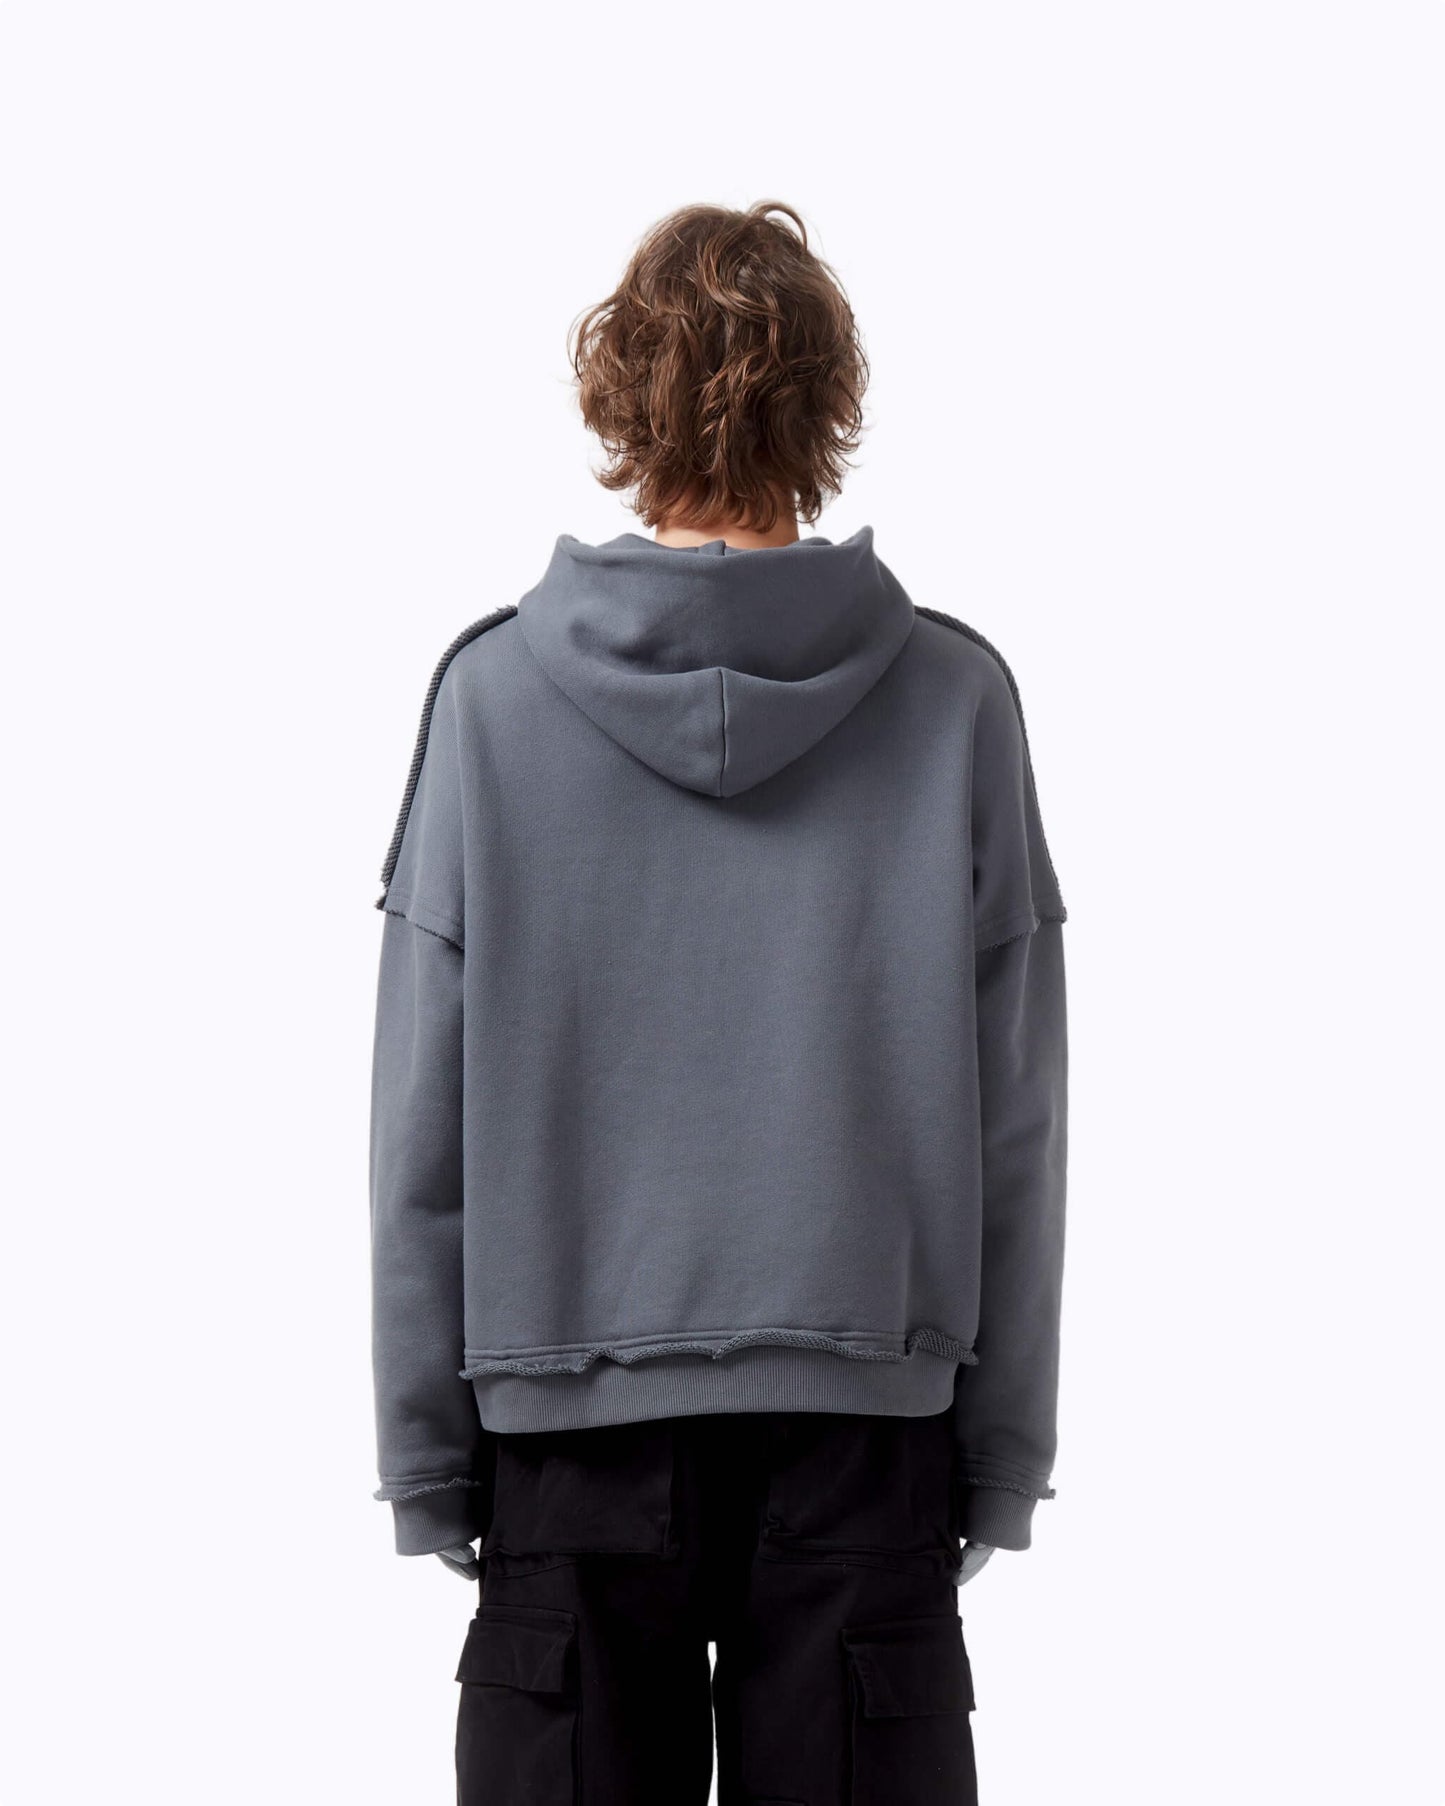 Deconstructed Face Hoodie